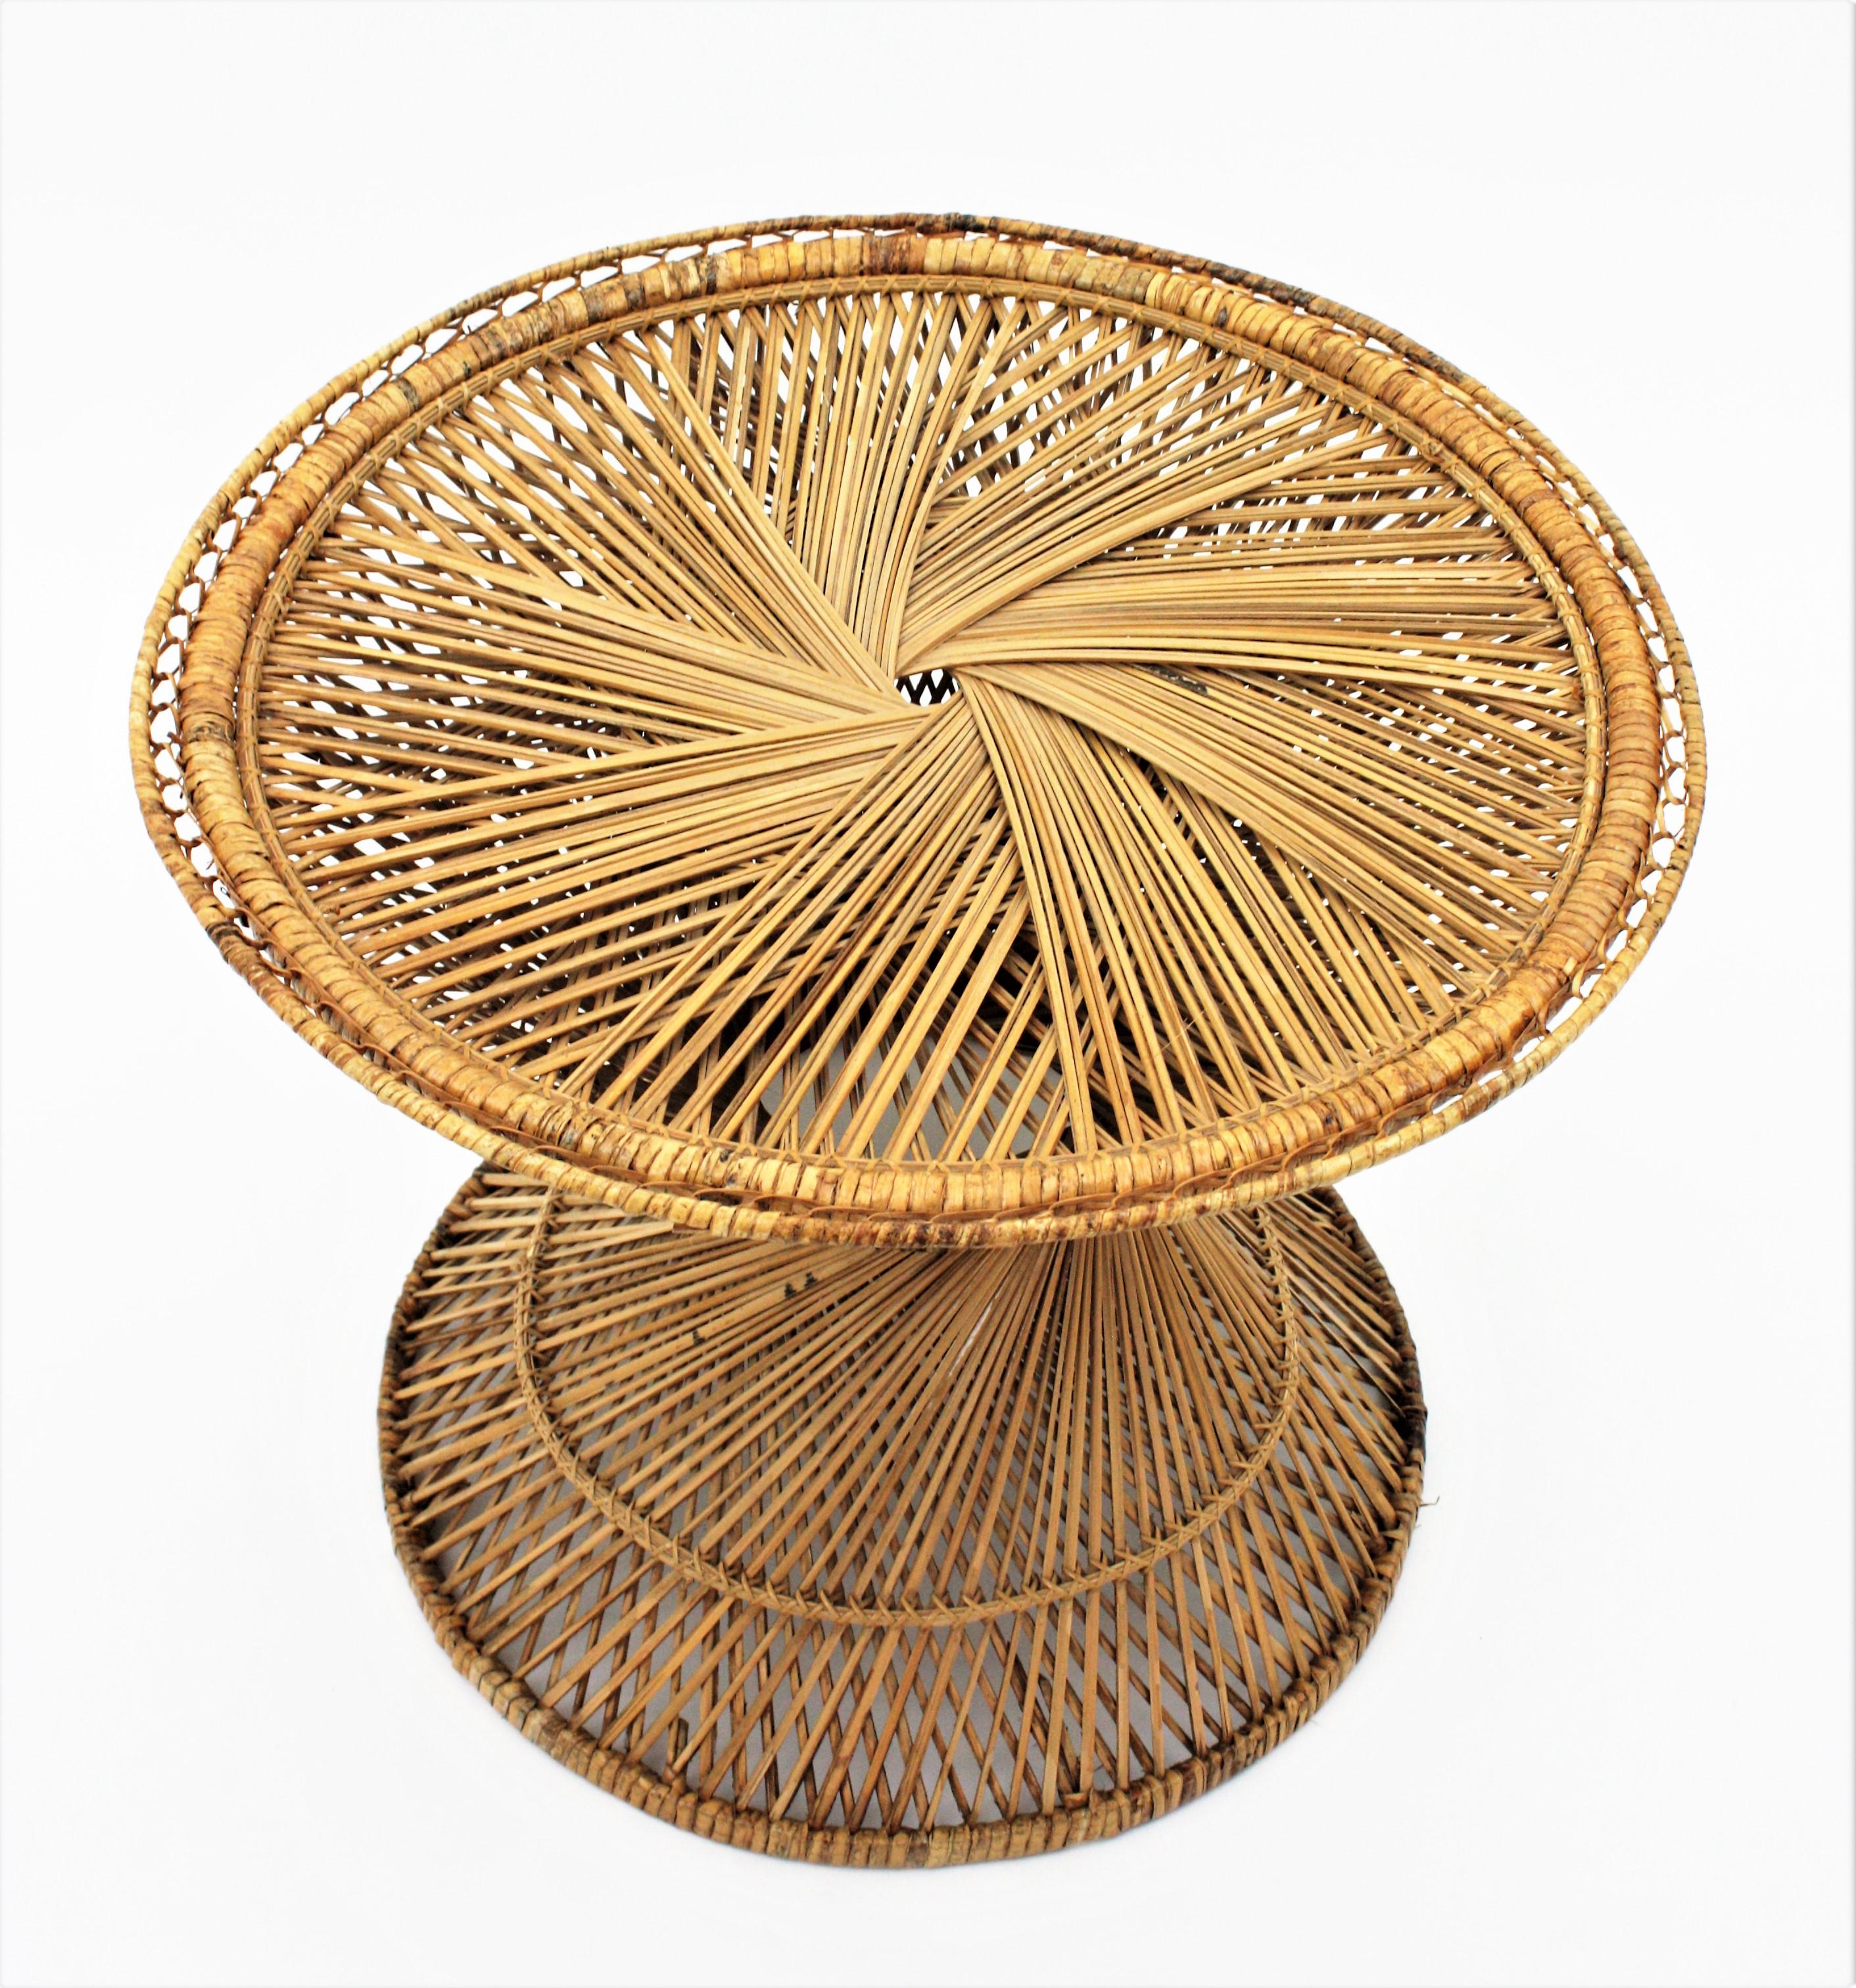 Woven Wicker and Rattan Emmanuelle Peacock Coffee Table, Spain, 1960s For Sale 4